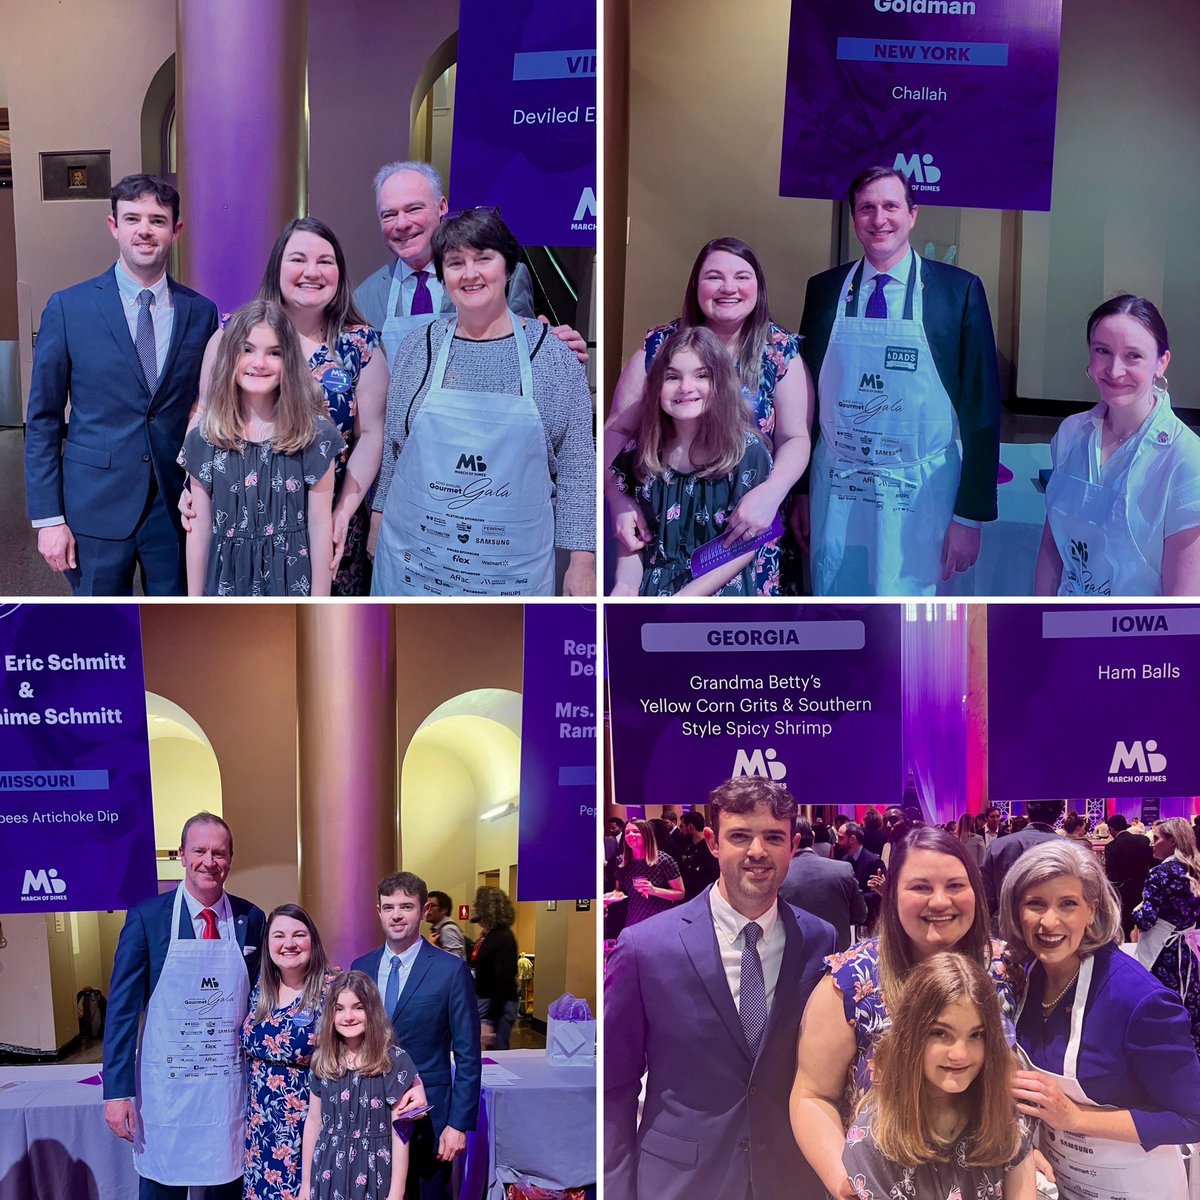 We had a great time @MarchofDimes Gourmet Gala last night. We are so grateful for the many sponsors, attendees, and congressional chefs! Let’s continue the work to ensure all moms and babies have safe outcomes. 💜